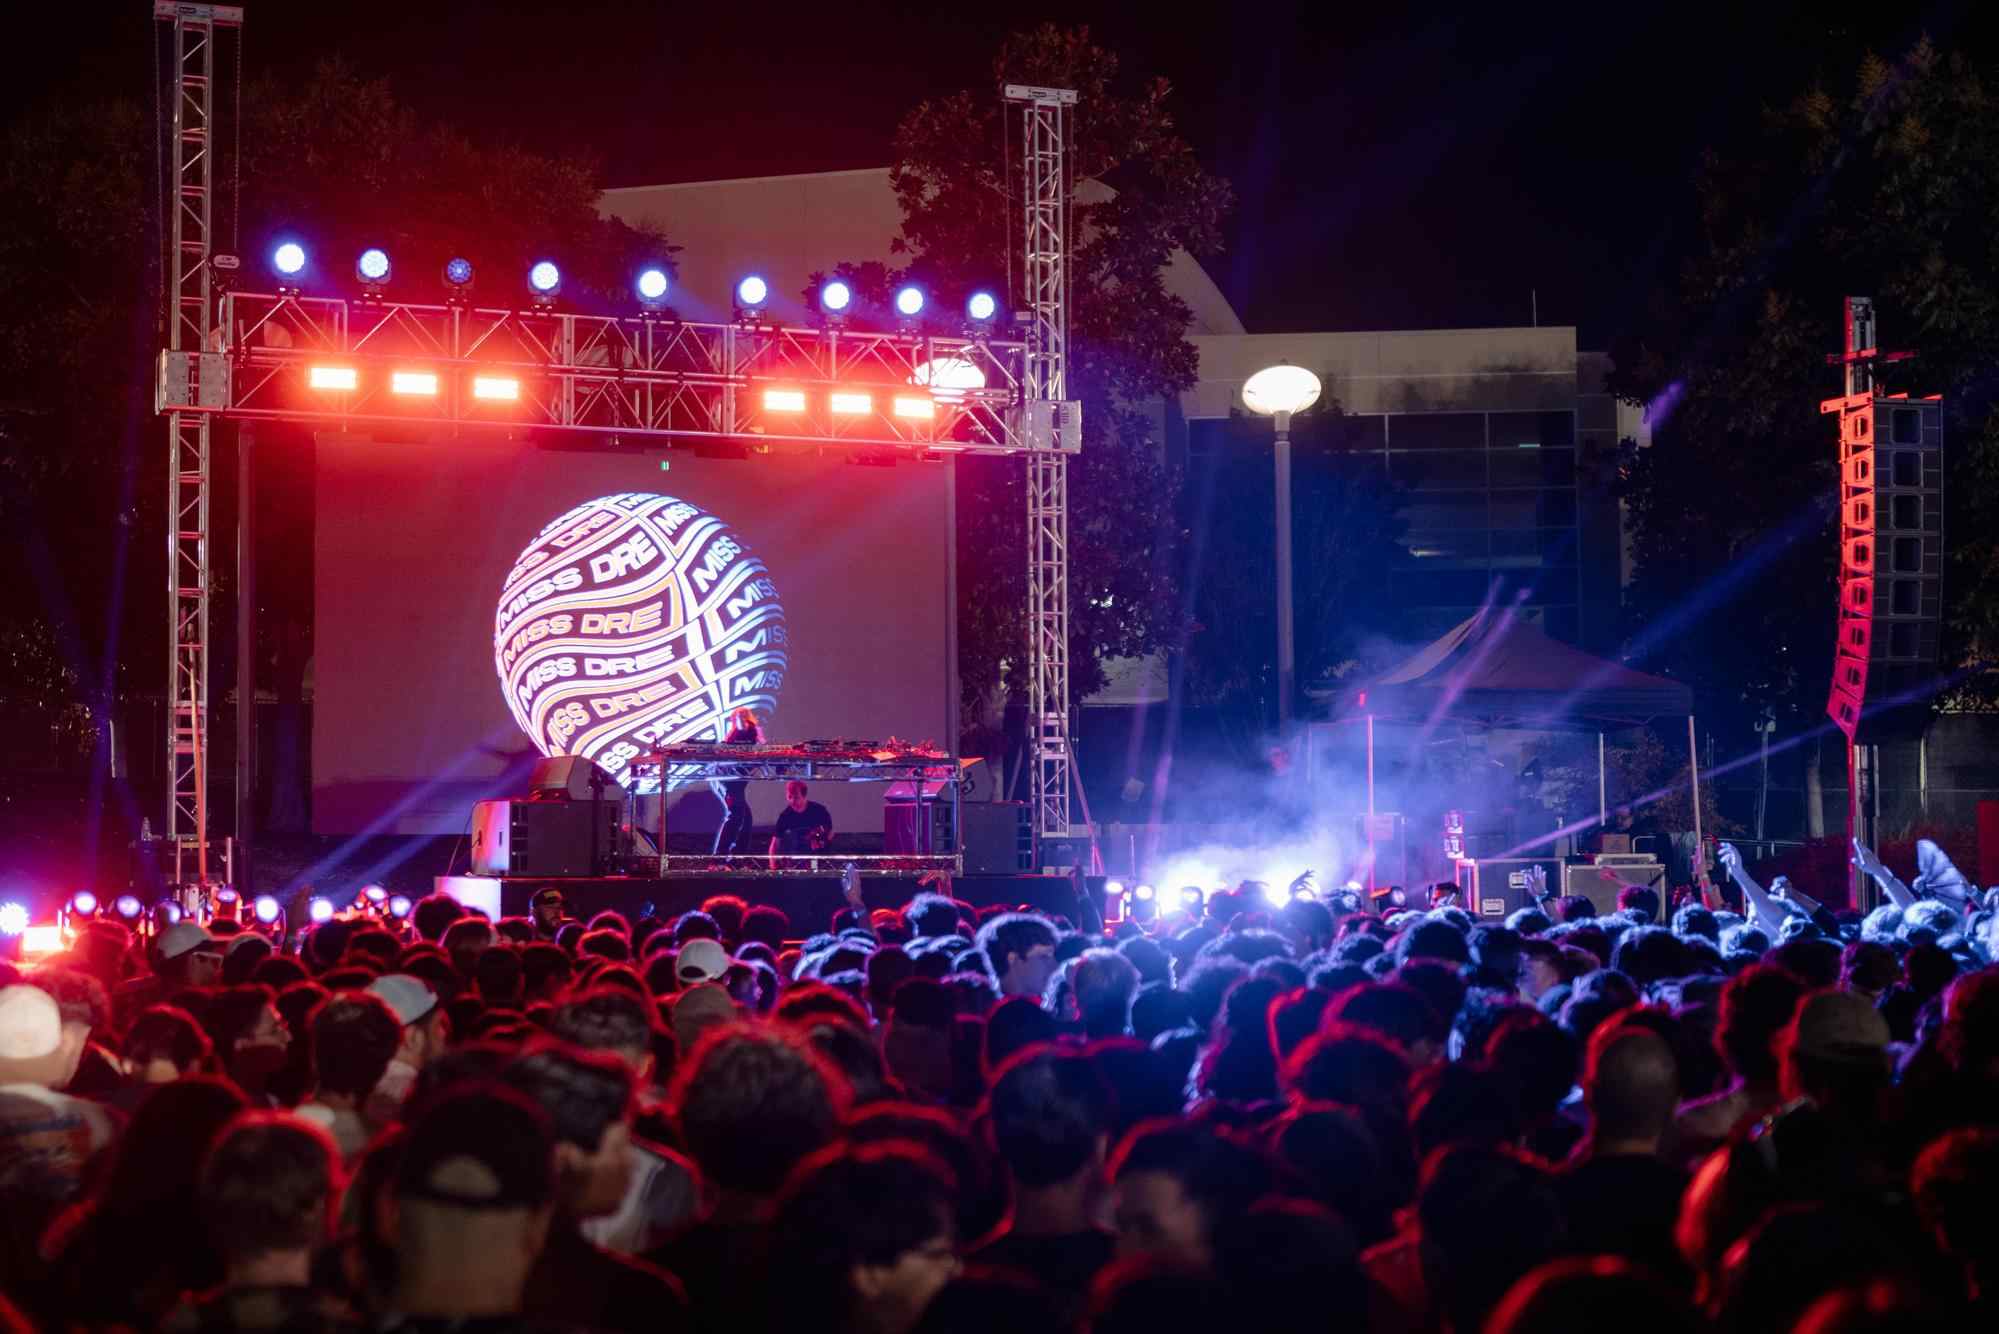 large crowd at an outdoor music event at night with a DJ performing on stage